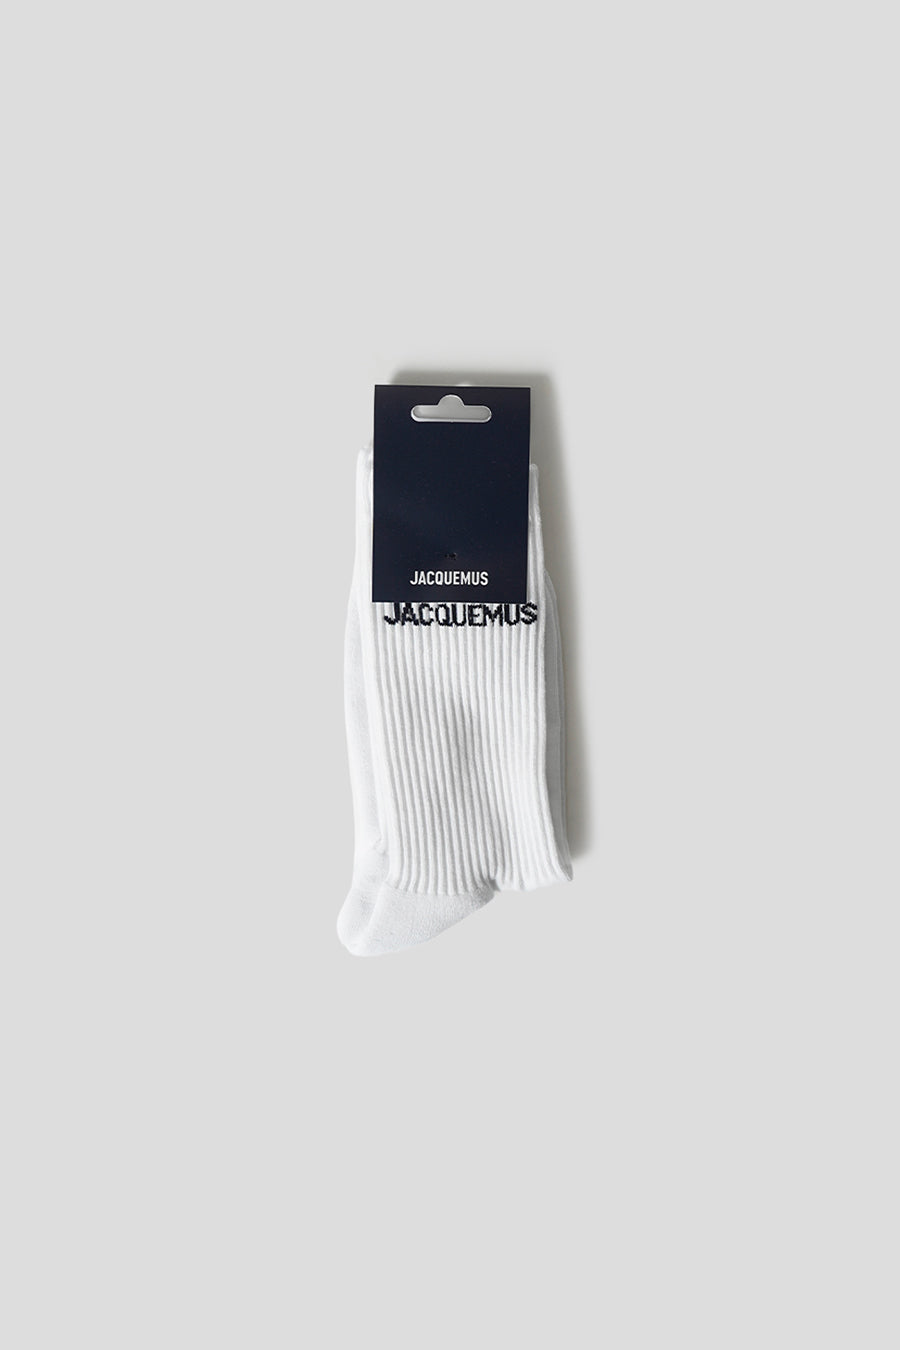 Chaussettes blanches | Elya